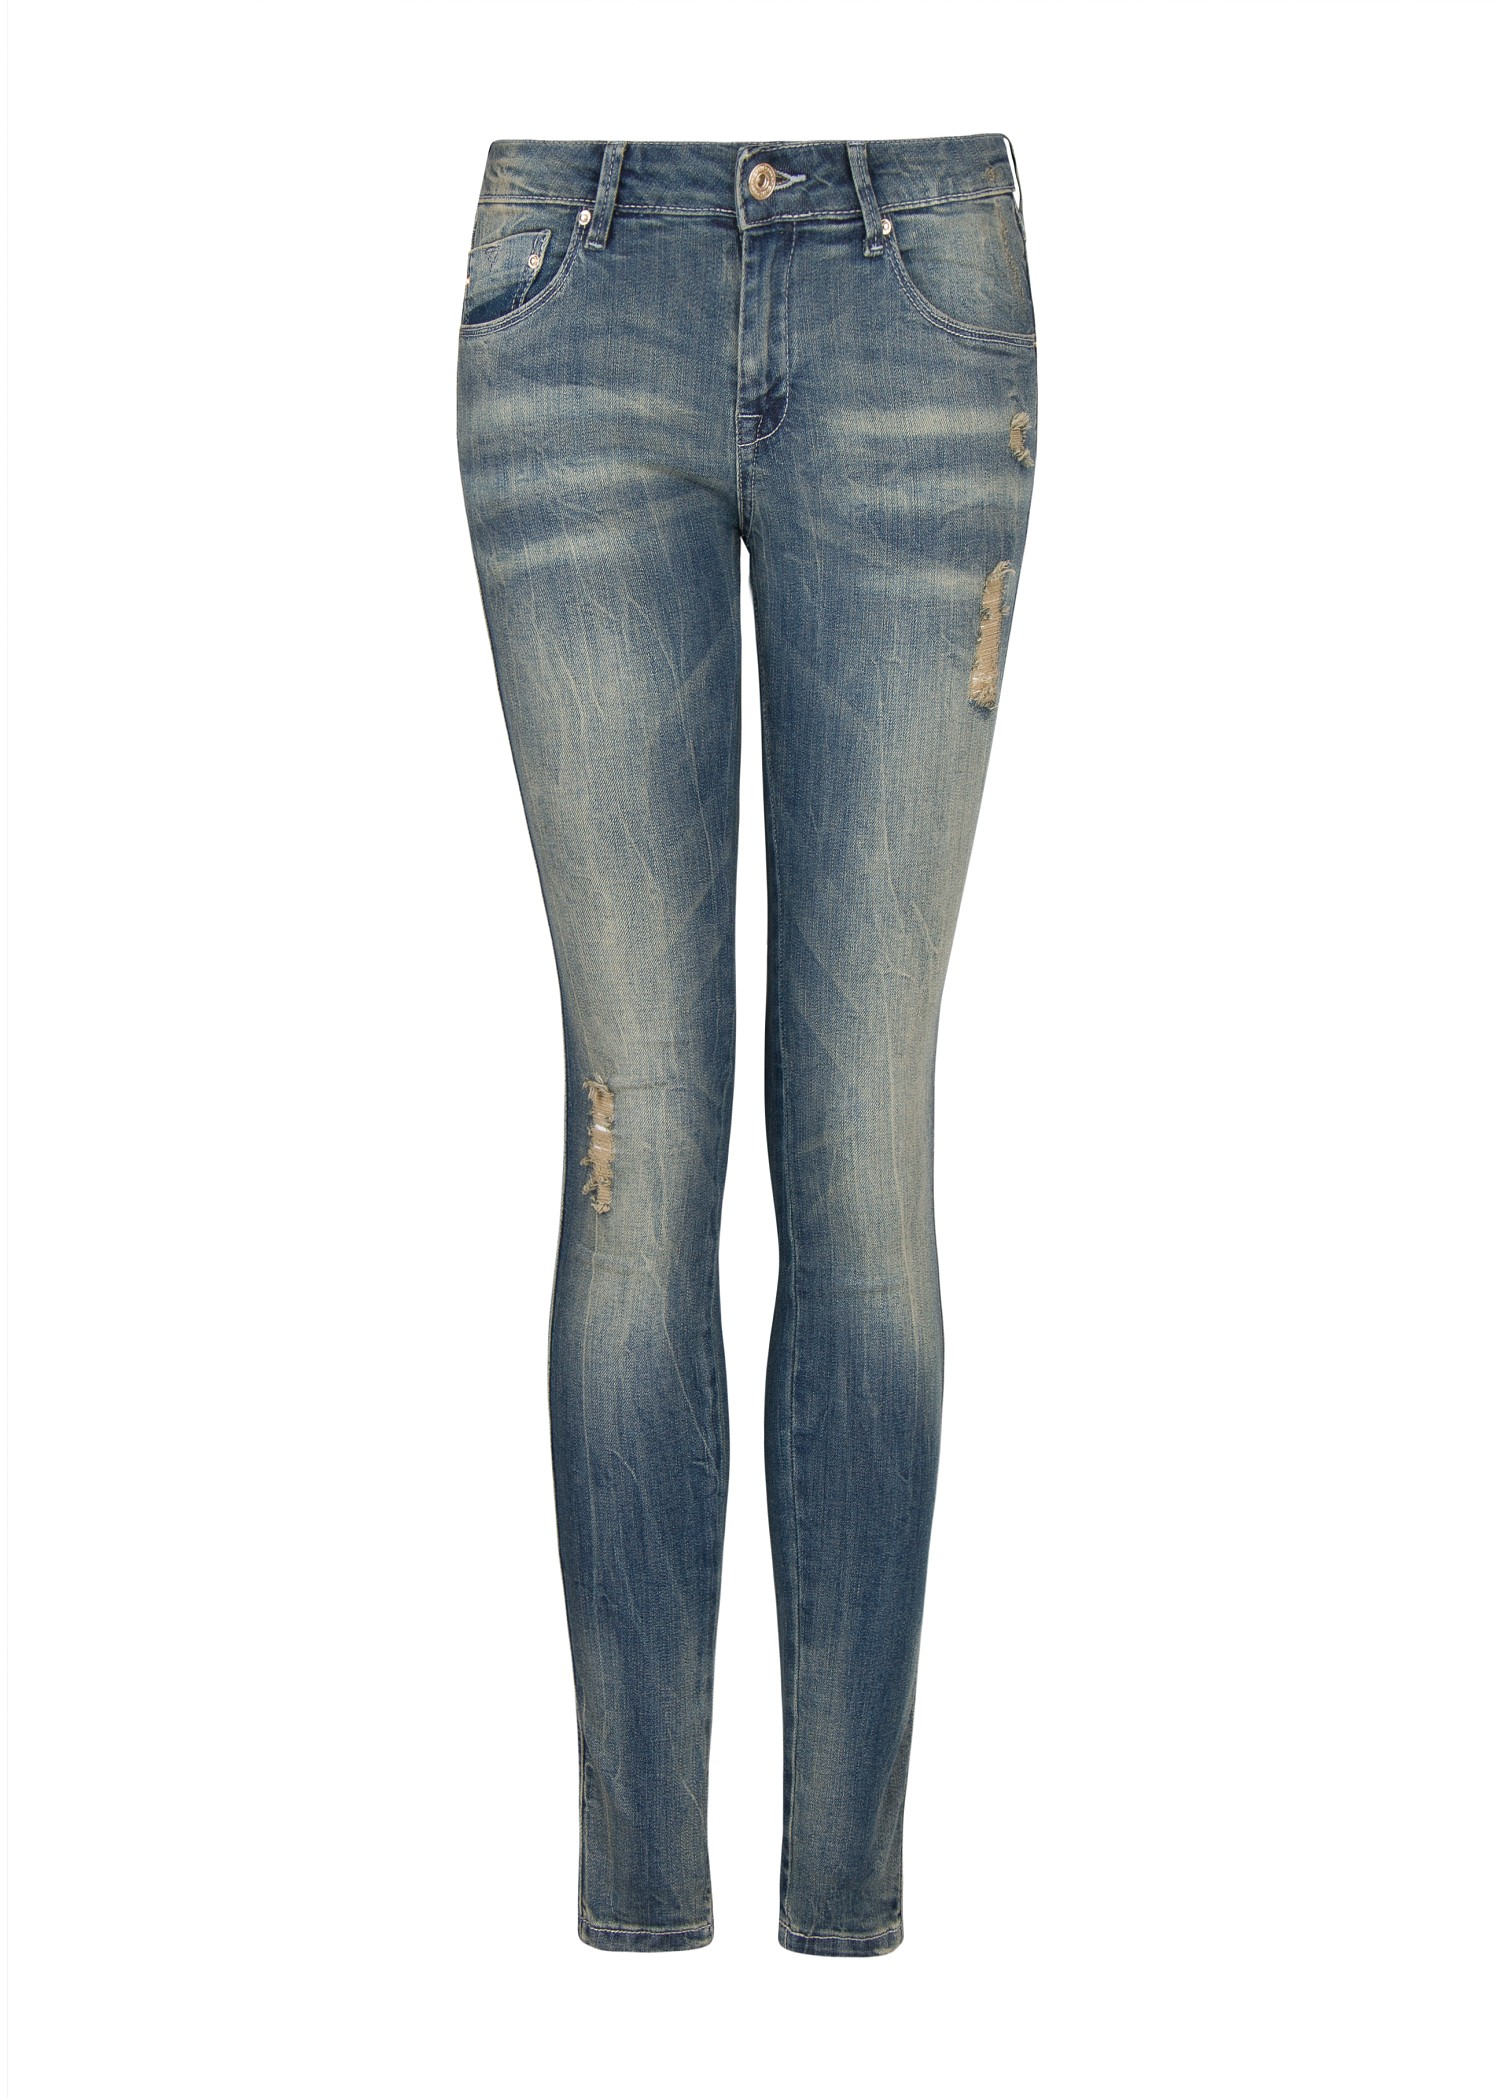 Mango Push Up Uptown Jeans in Light Dirty (Blue) - Lyst